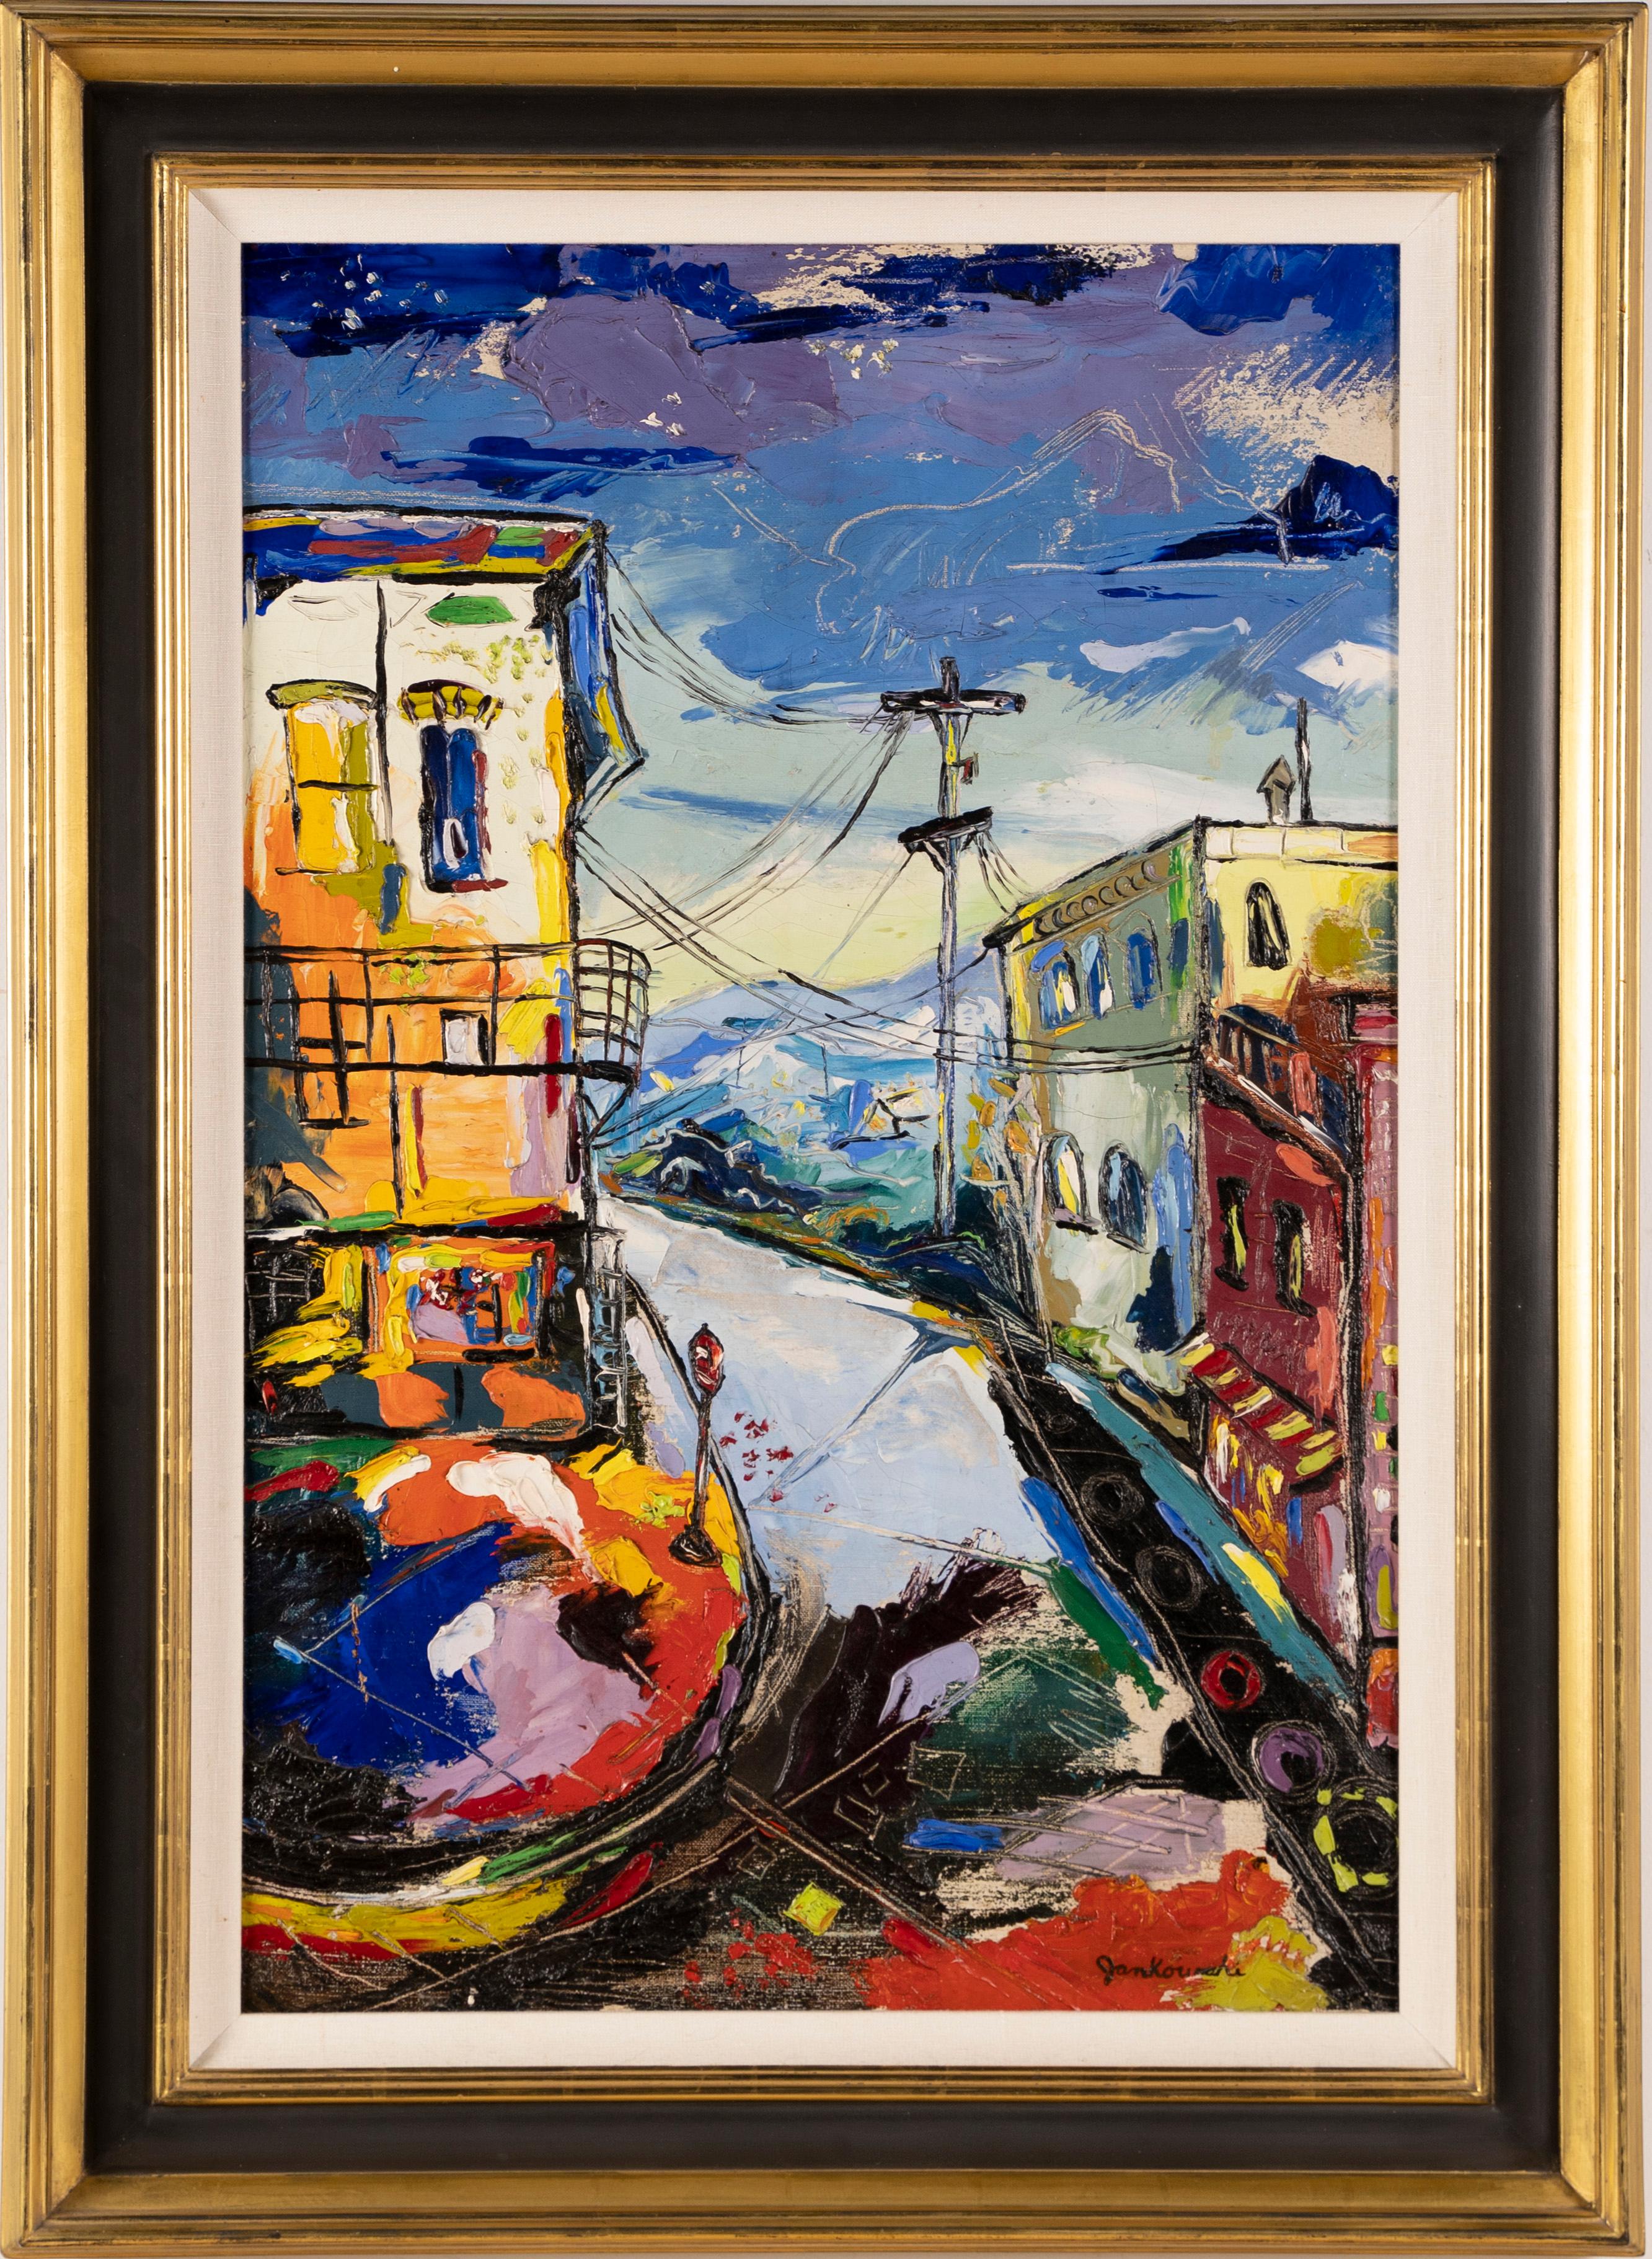 Zygmund Jankowski Abstract Painting - Antique Polish American Modernist Cityscape Fauvist Original Signed Oil Painting